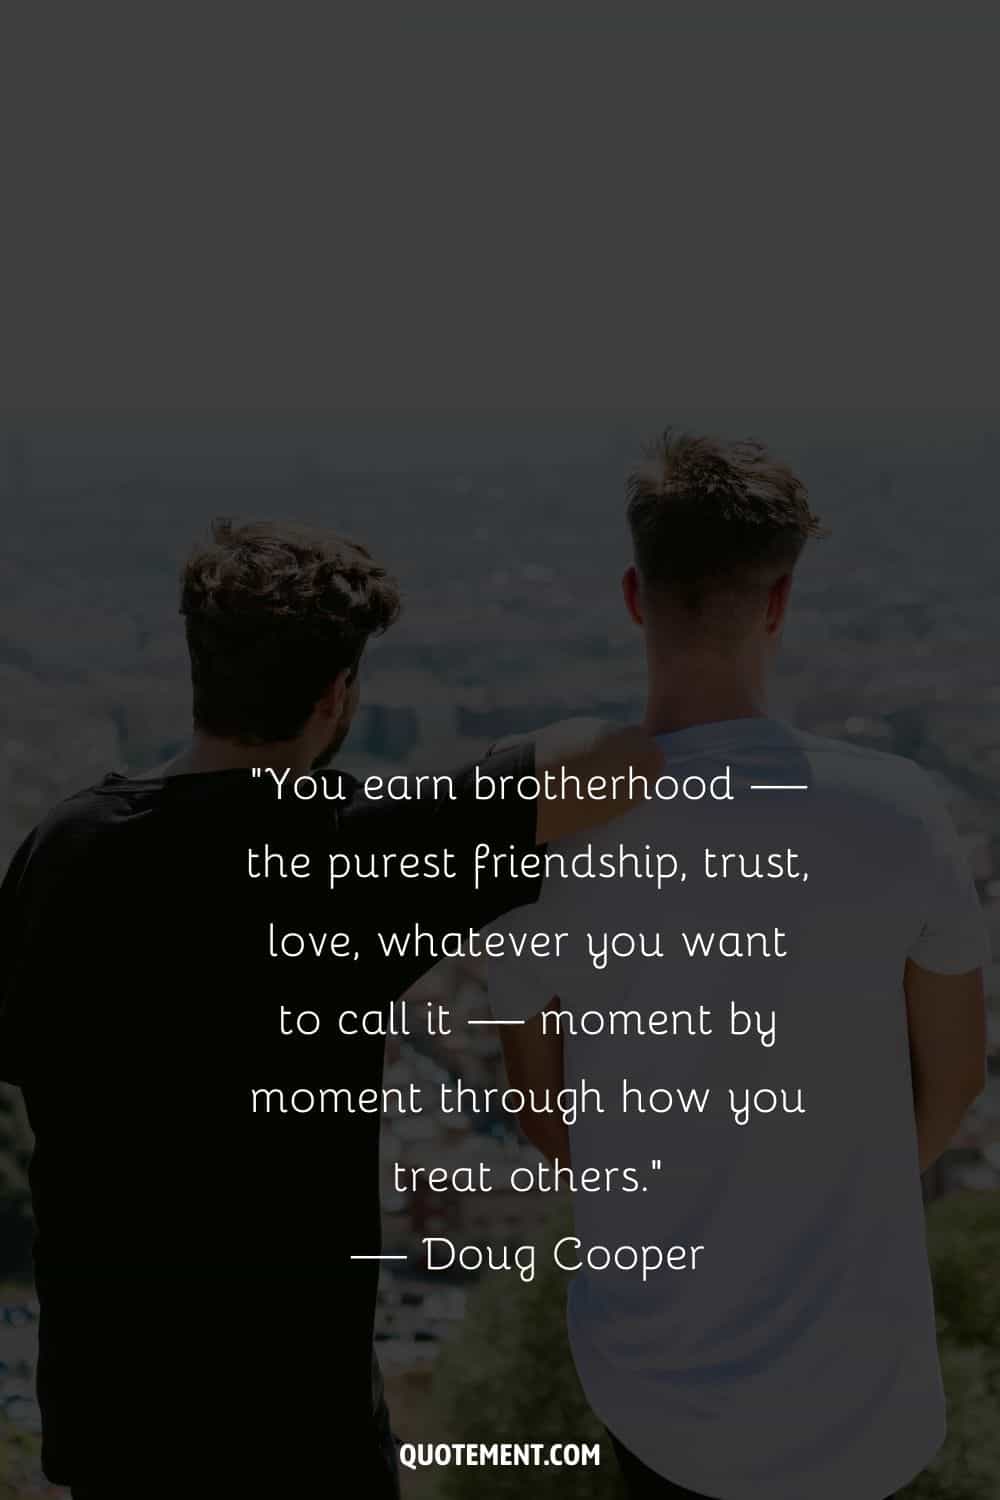 two guys watching the city image representing brotherhood friendship quote